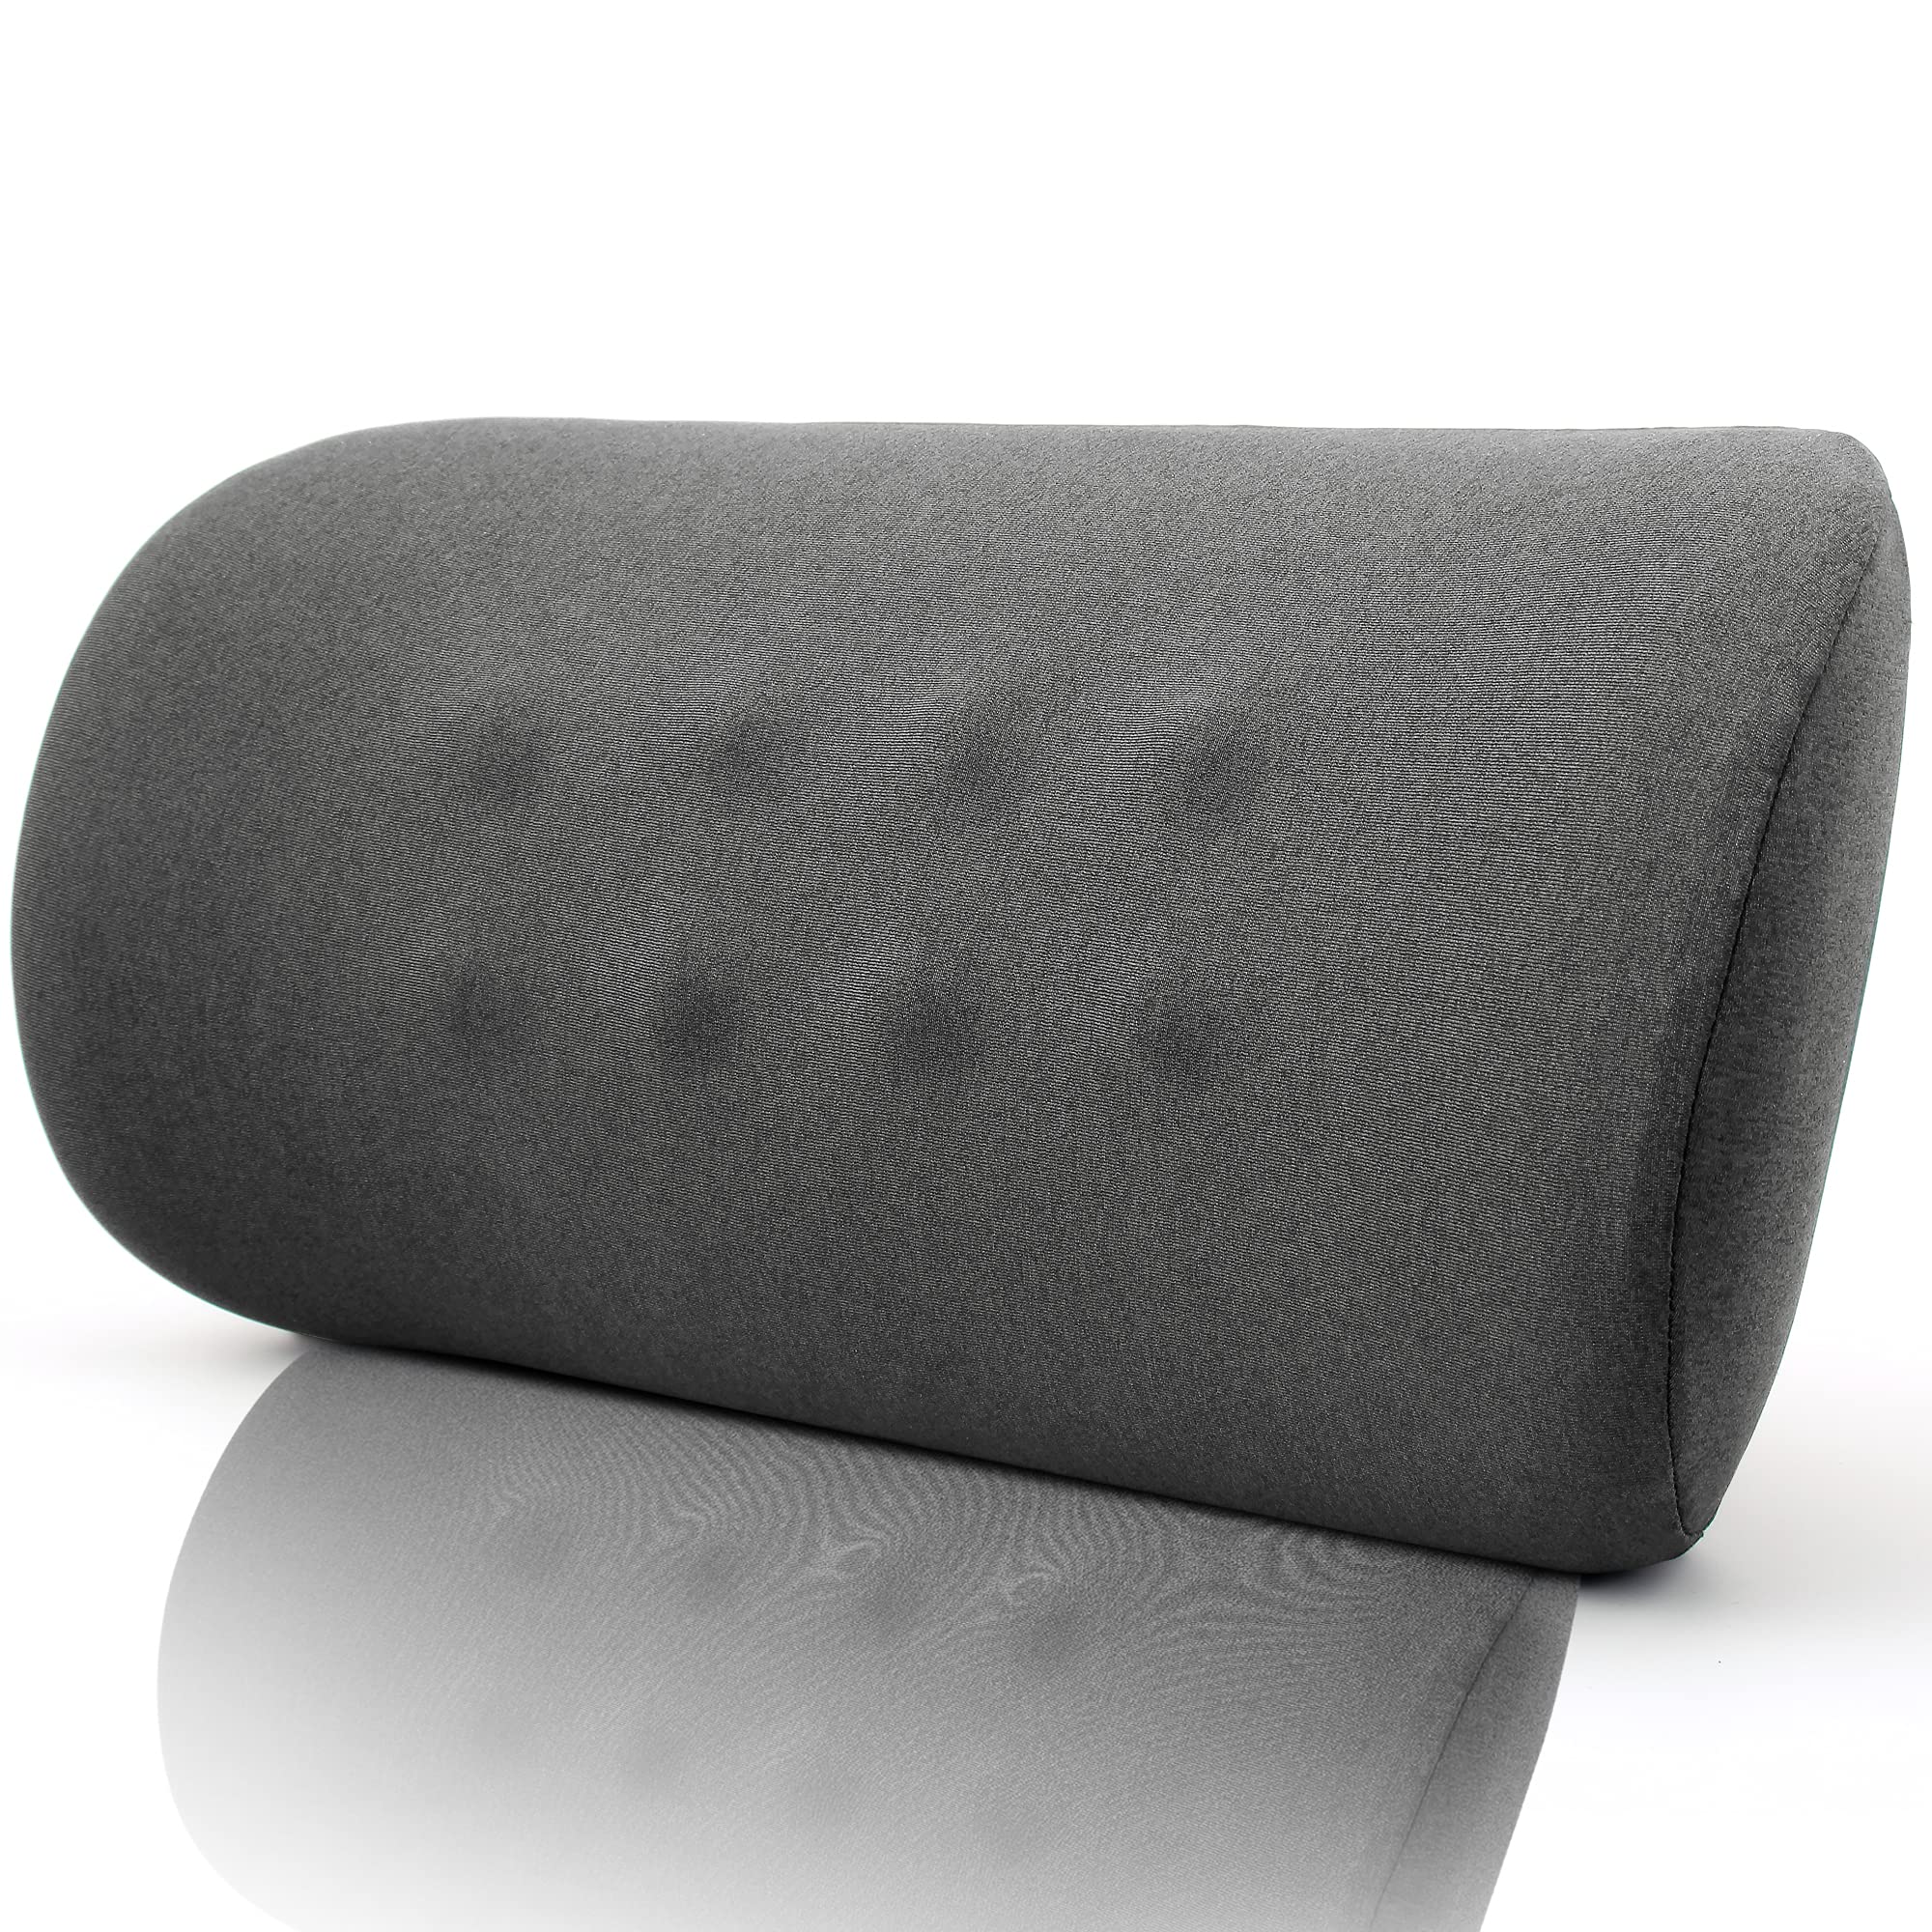 Lumbar Support Pillow for Office Chair and Car Seat Memory Foam Lower Back Lumbar Support Cushion Ergonomic Back Support Pillow for Back Pain Relie...